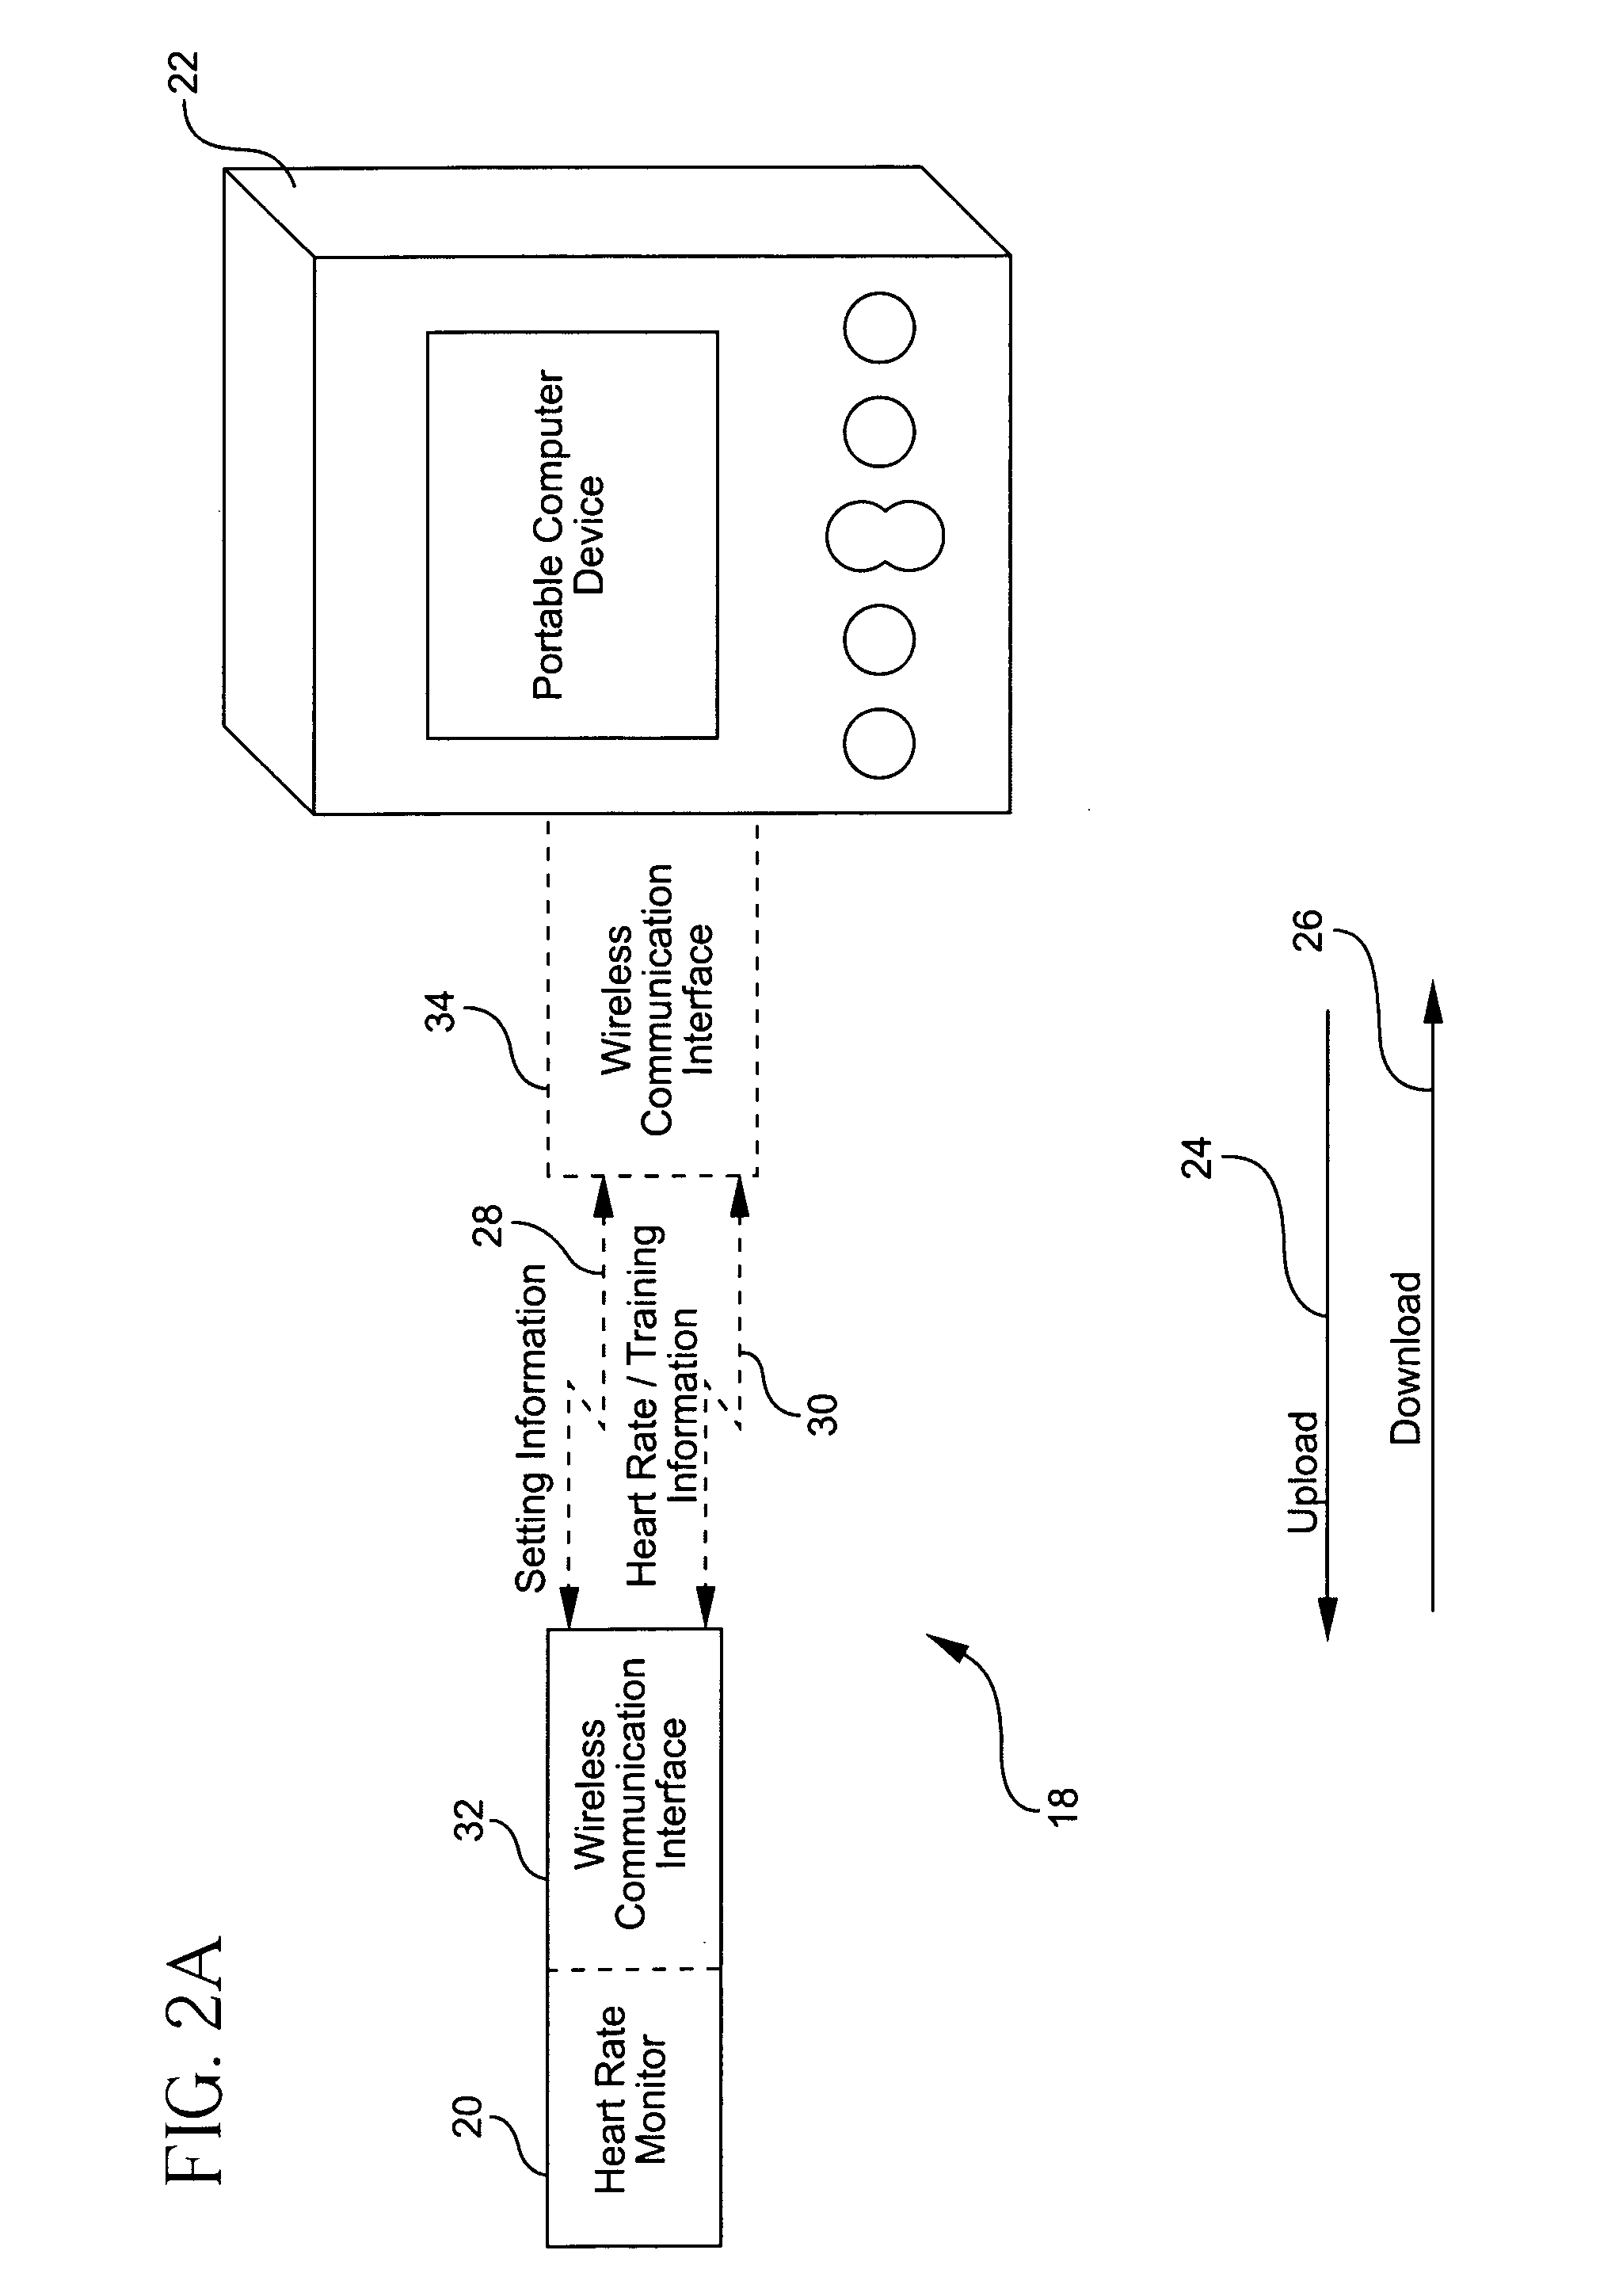 Method for processing heart rate information in a portable computer